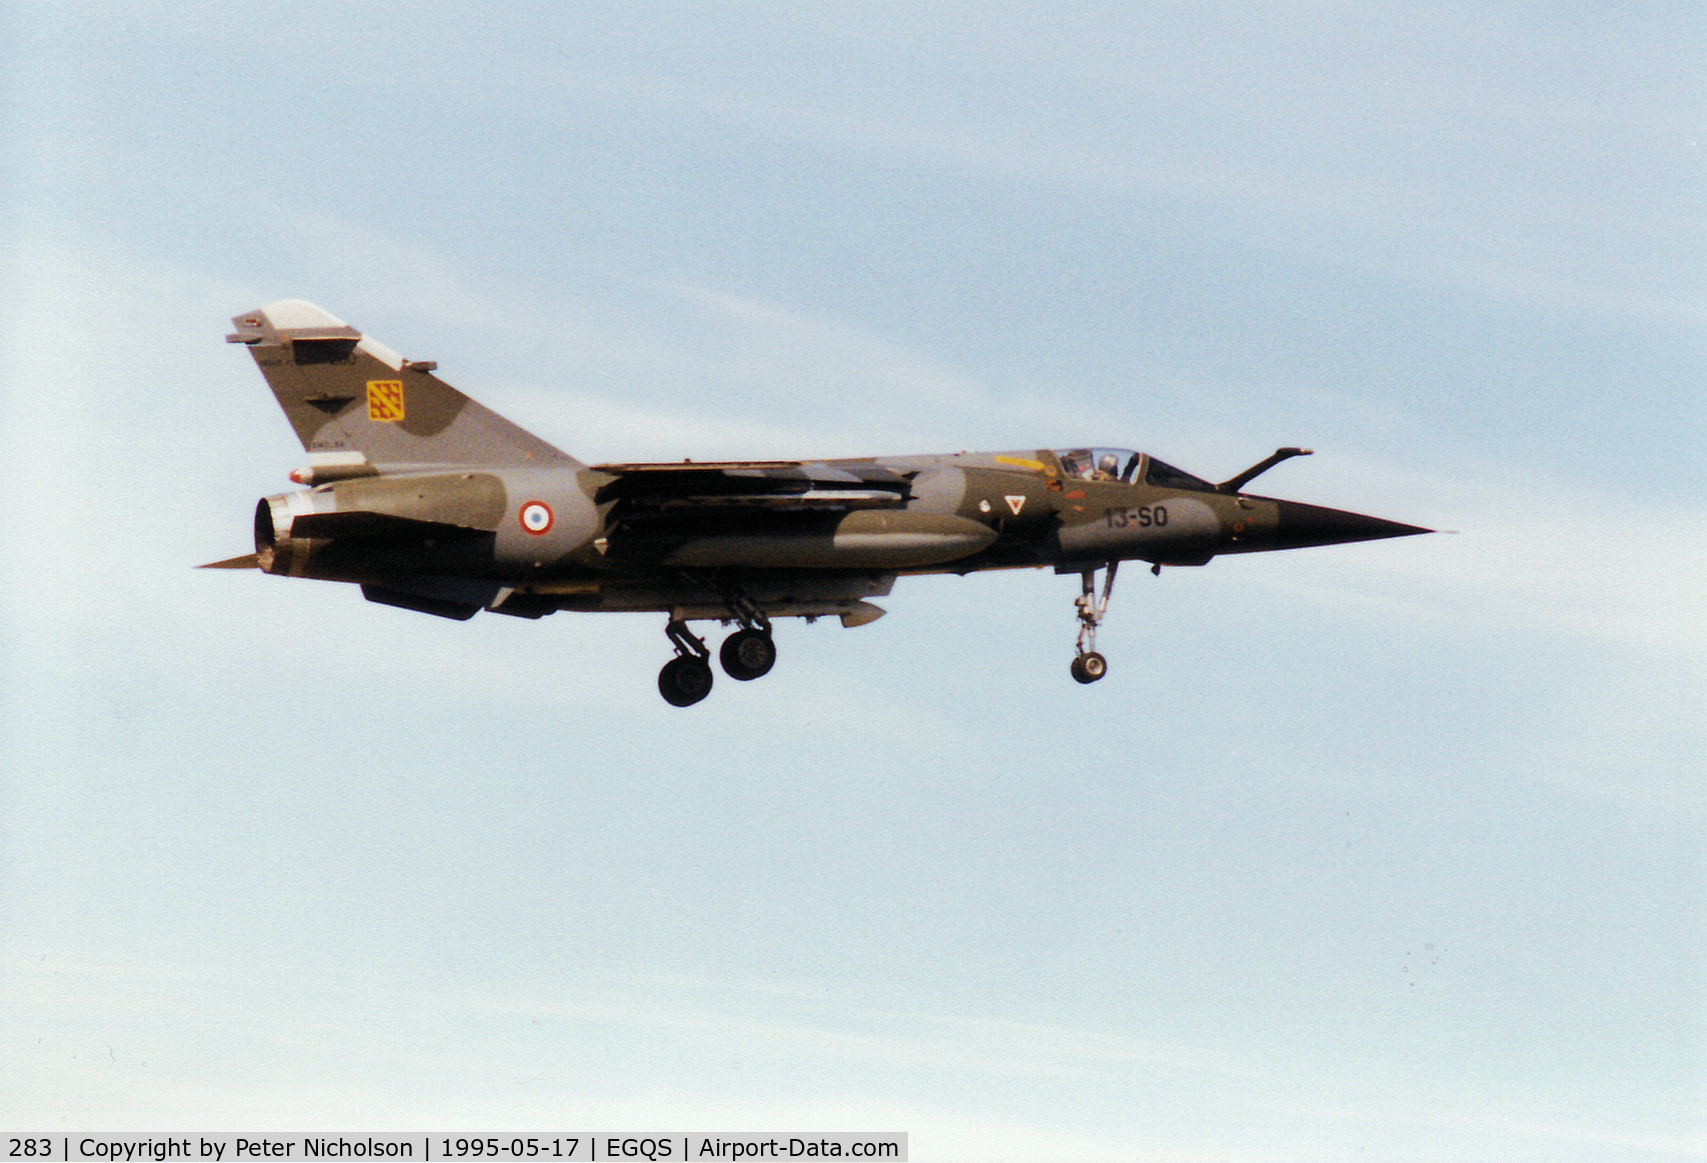 283, Dassault Mirage F.1CT C/N 283, Mirage F.1CT, callsign French Air Force 5722, of EC 1/3 on final approach to Runway 05 at RAF Lossiemouth in May 1995.